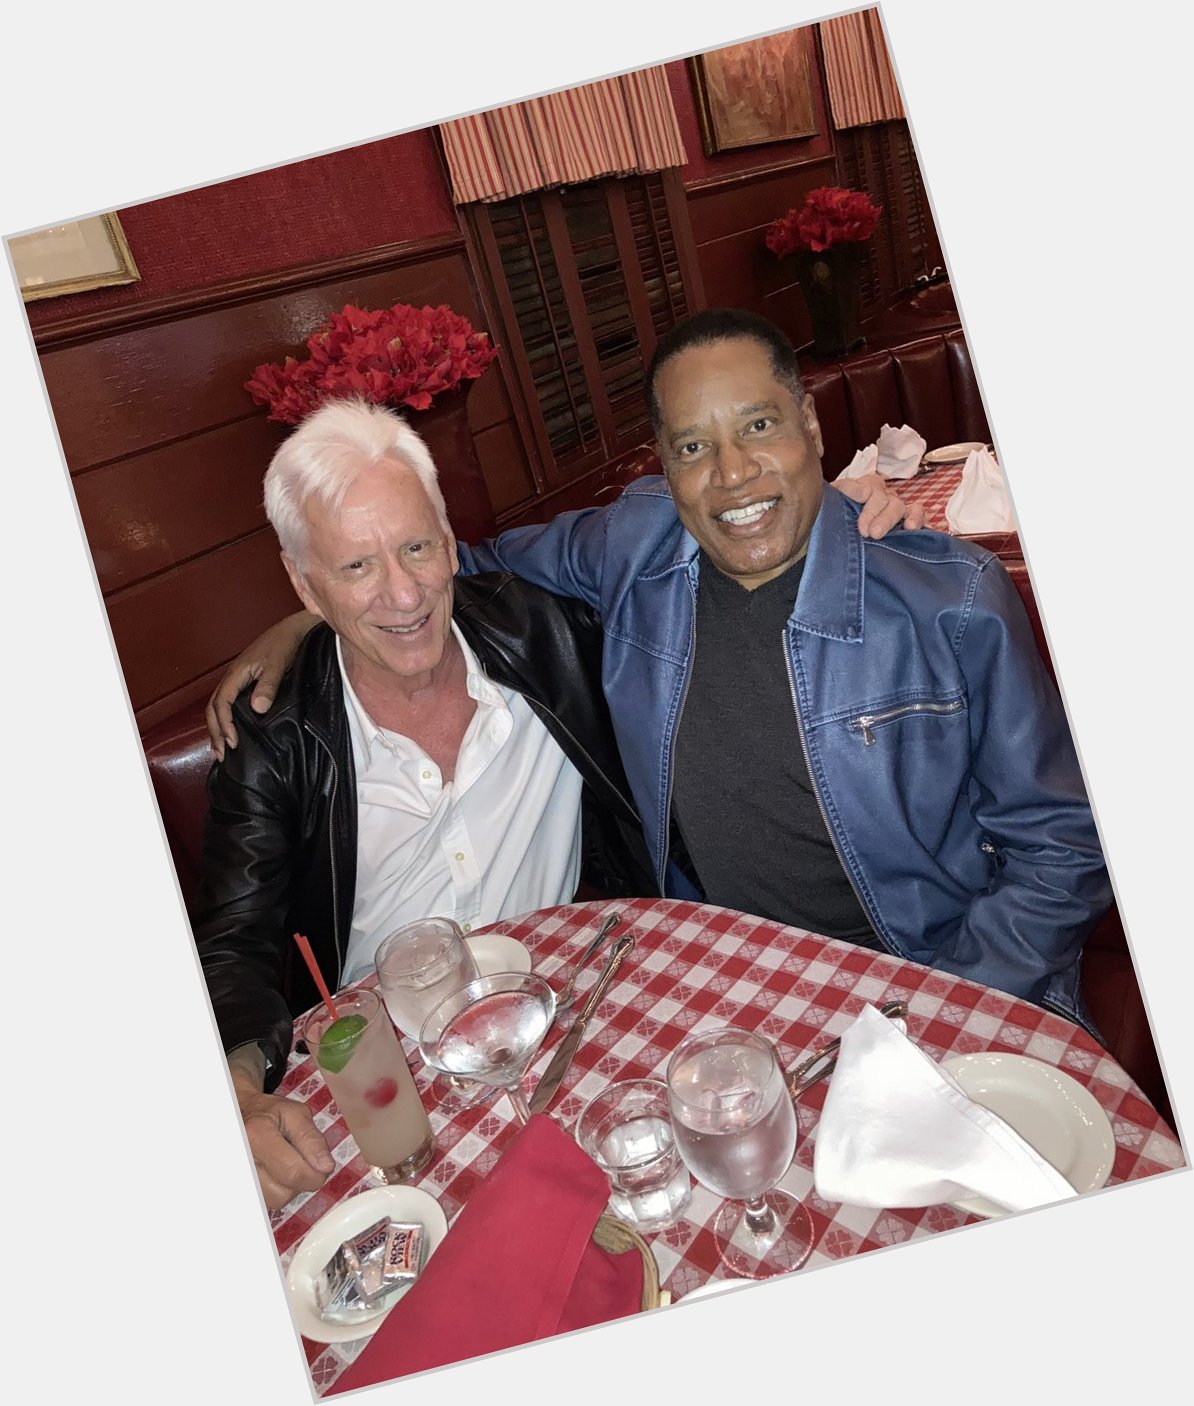 The Great James Woods ( wishing me a Happy Birthday! 